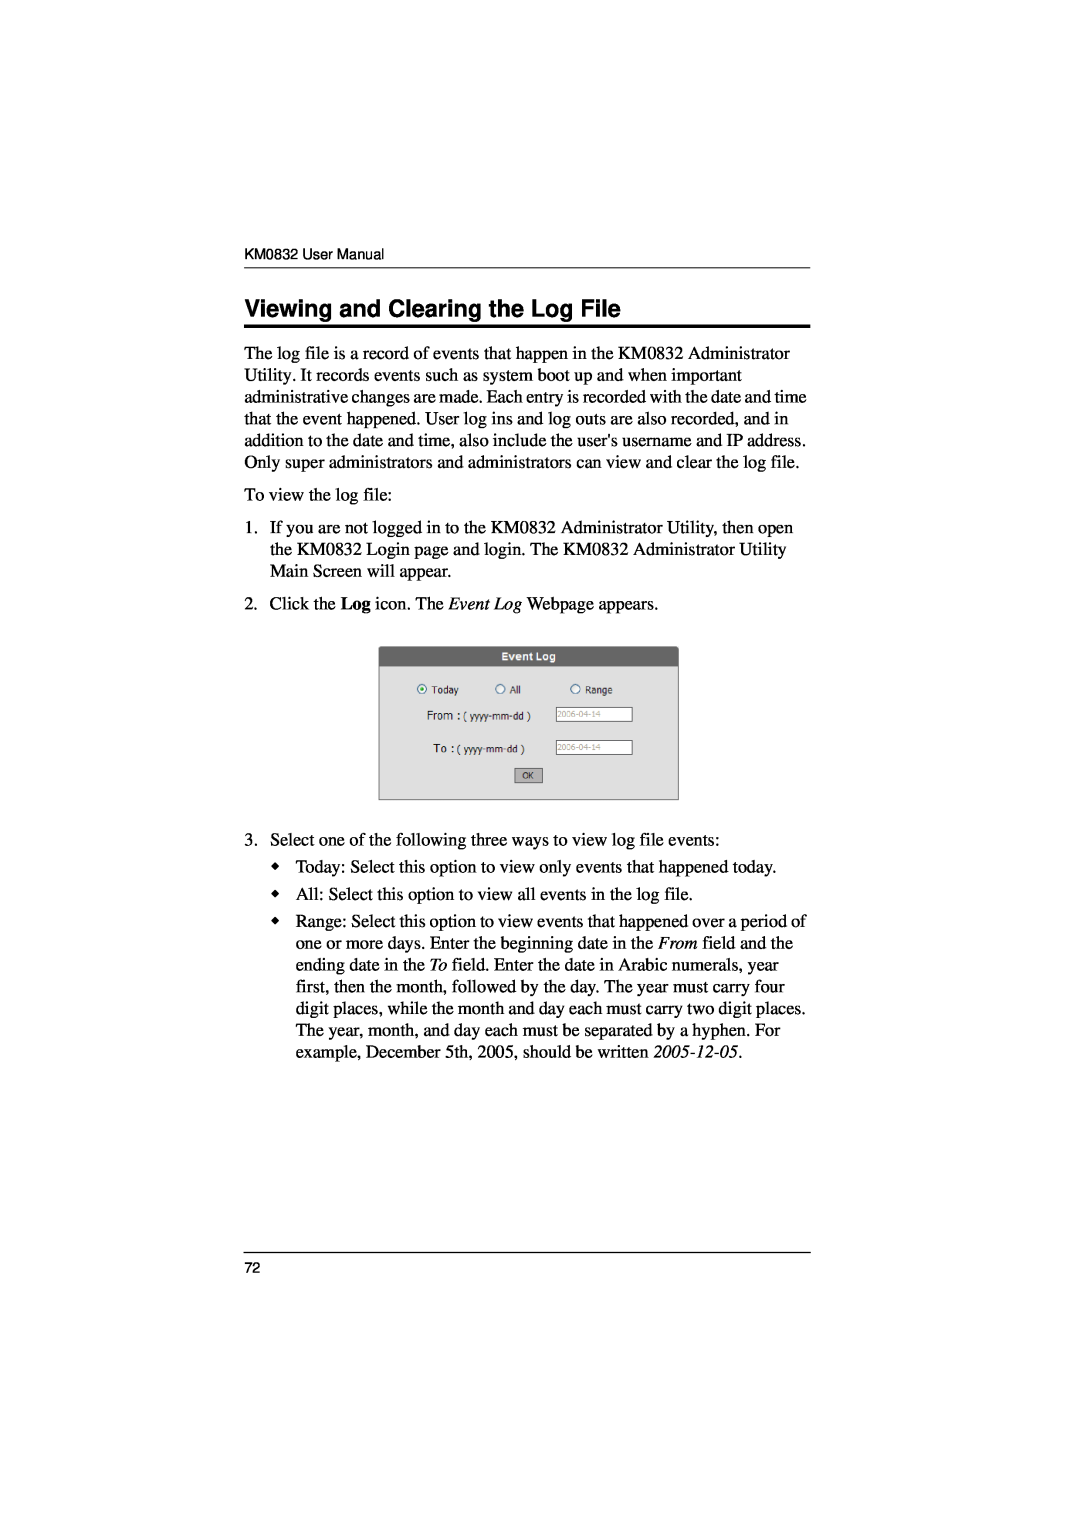 ATEN Technology KM0832 user manual Viewing and Clearing the Log File 